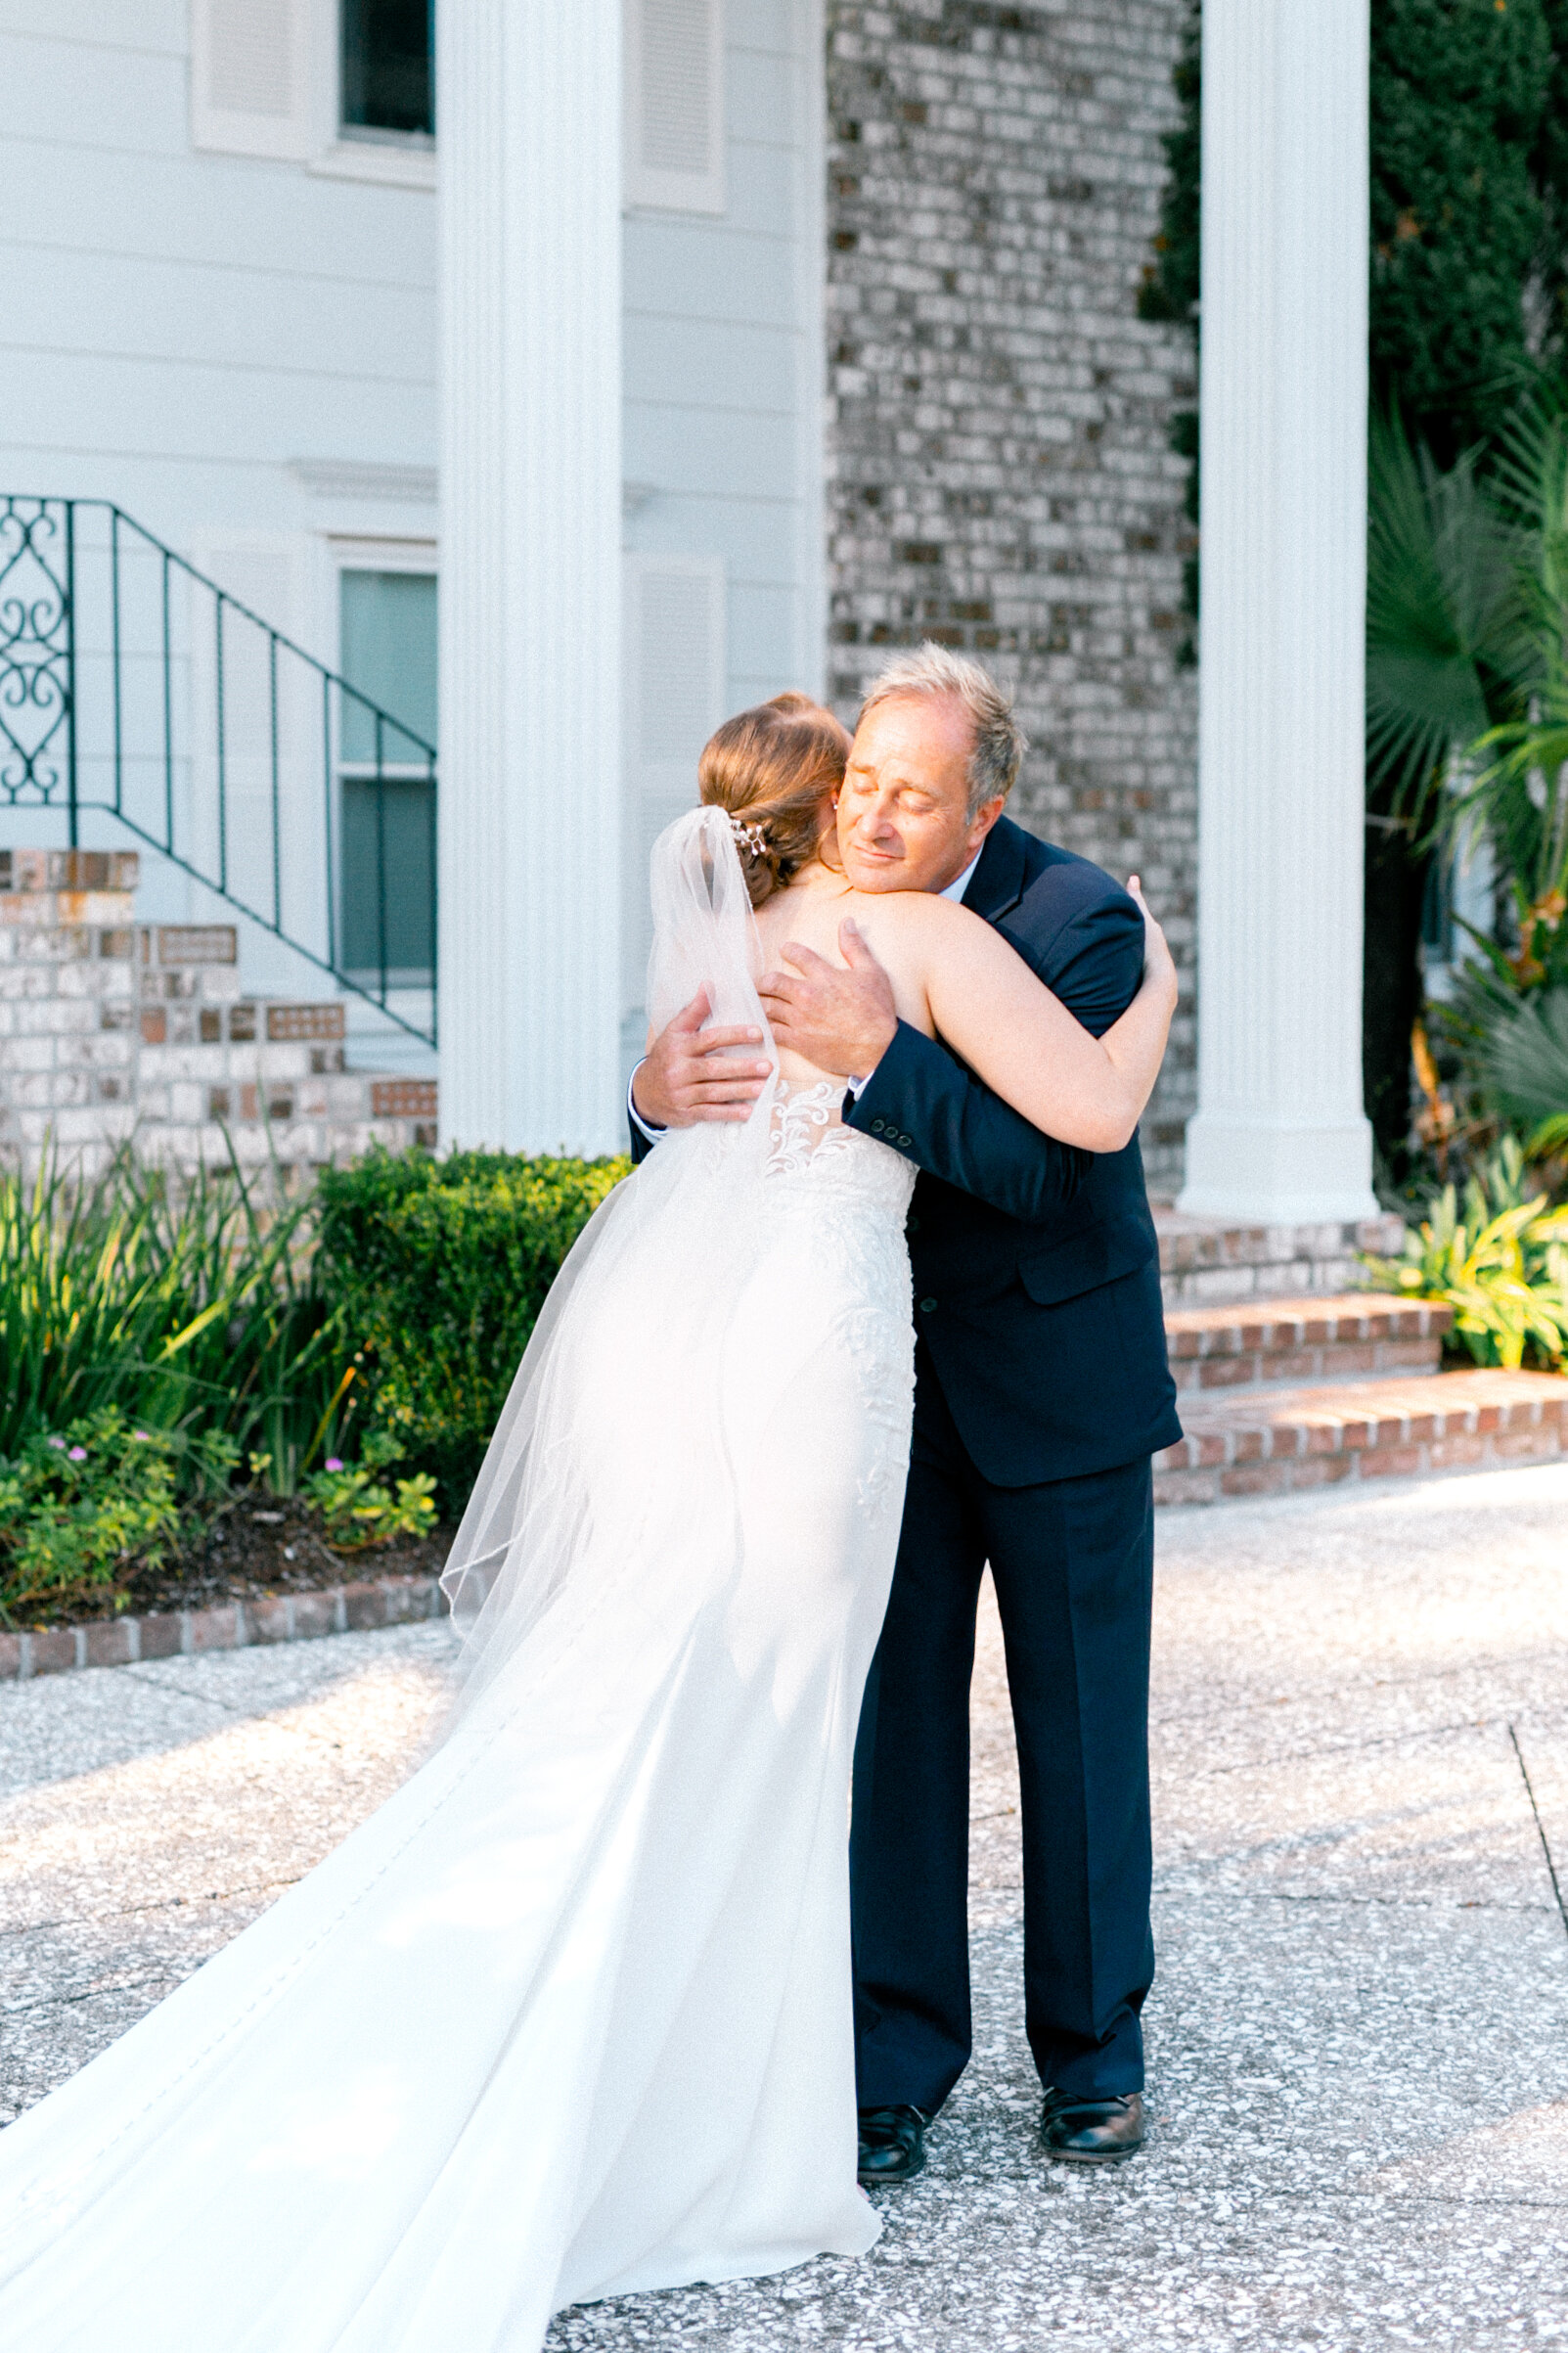 First look candid moment with the father of the bride at South Carolina wedding.